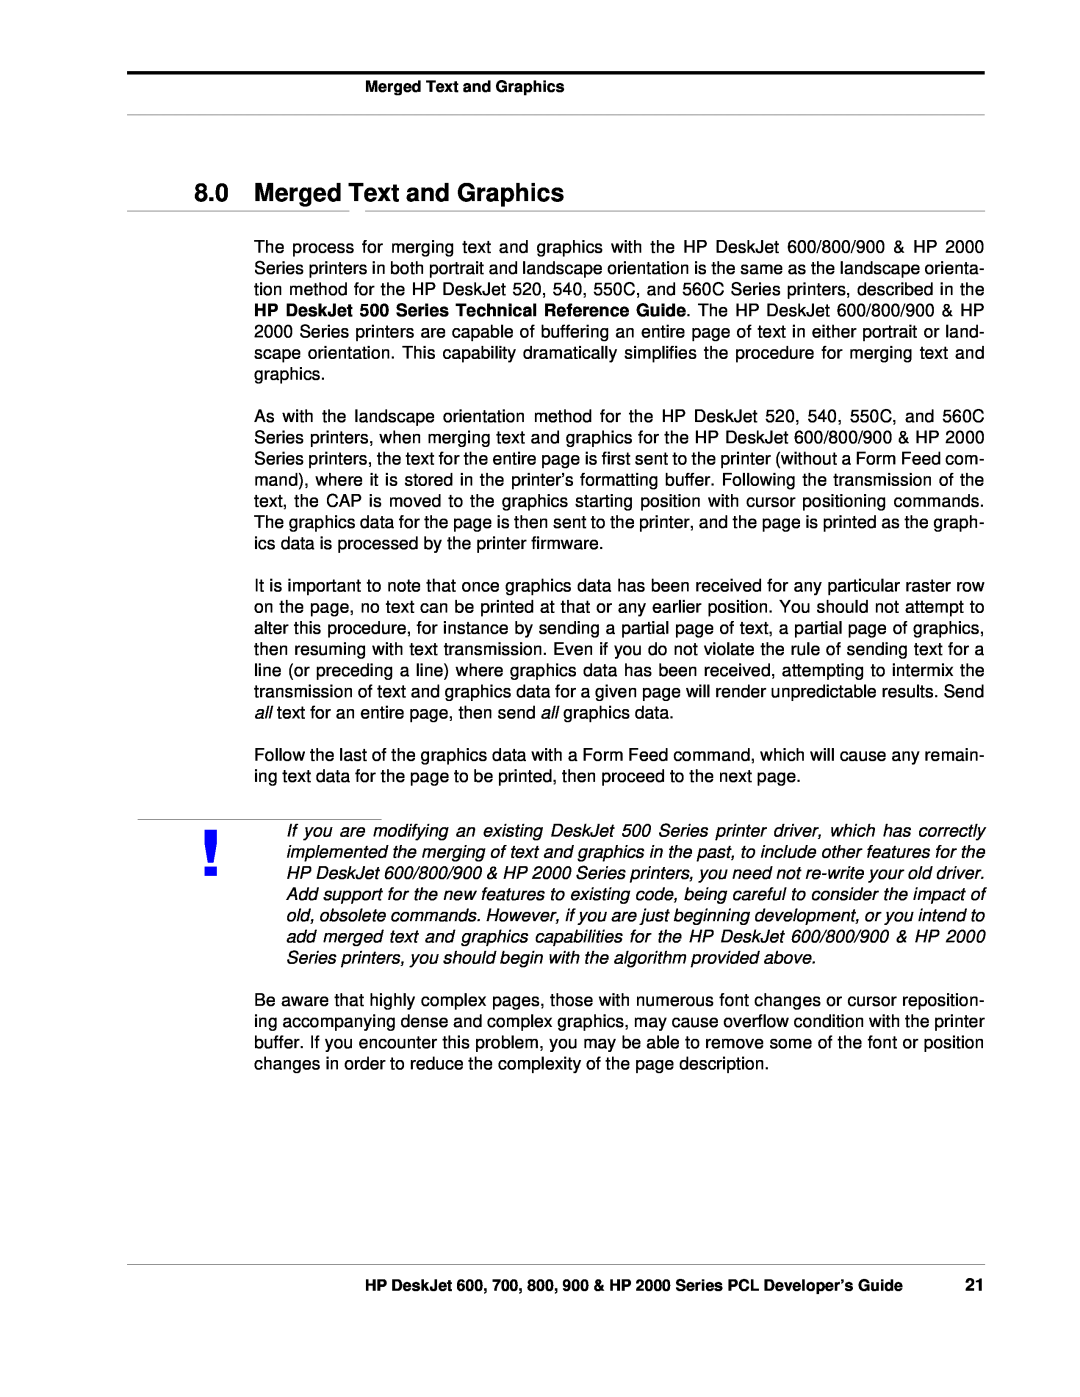 HP 700, 800 manual Merged Text and Graphics 